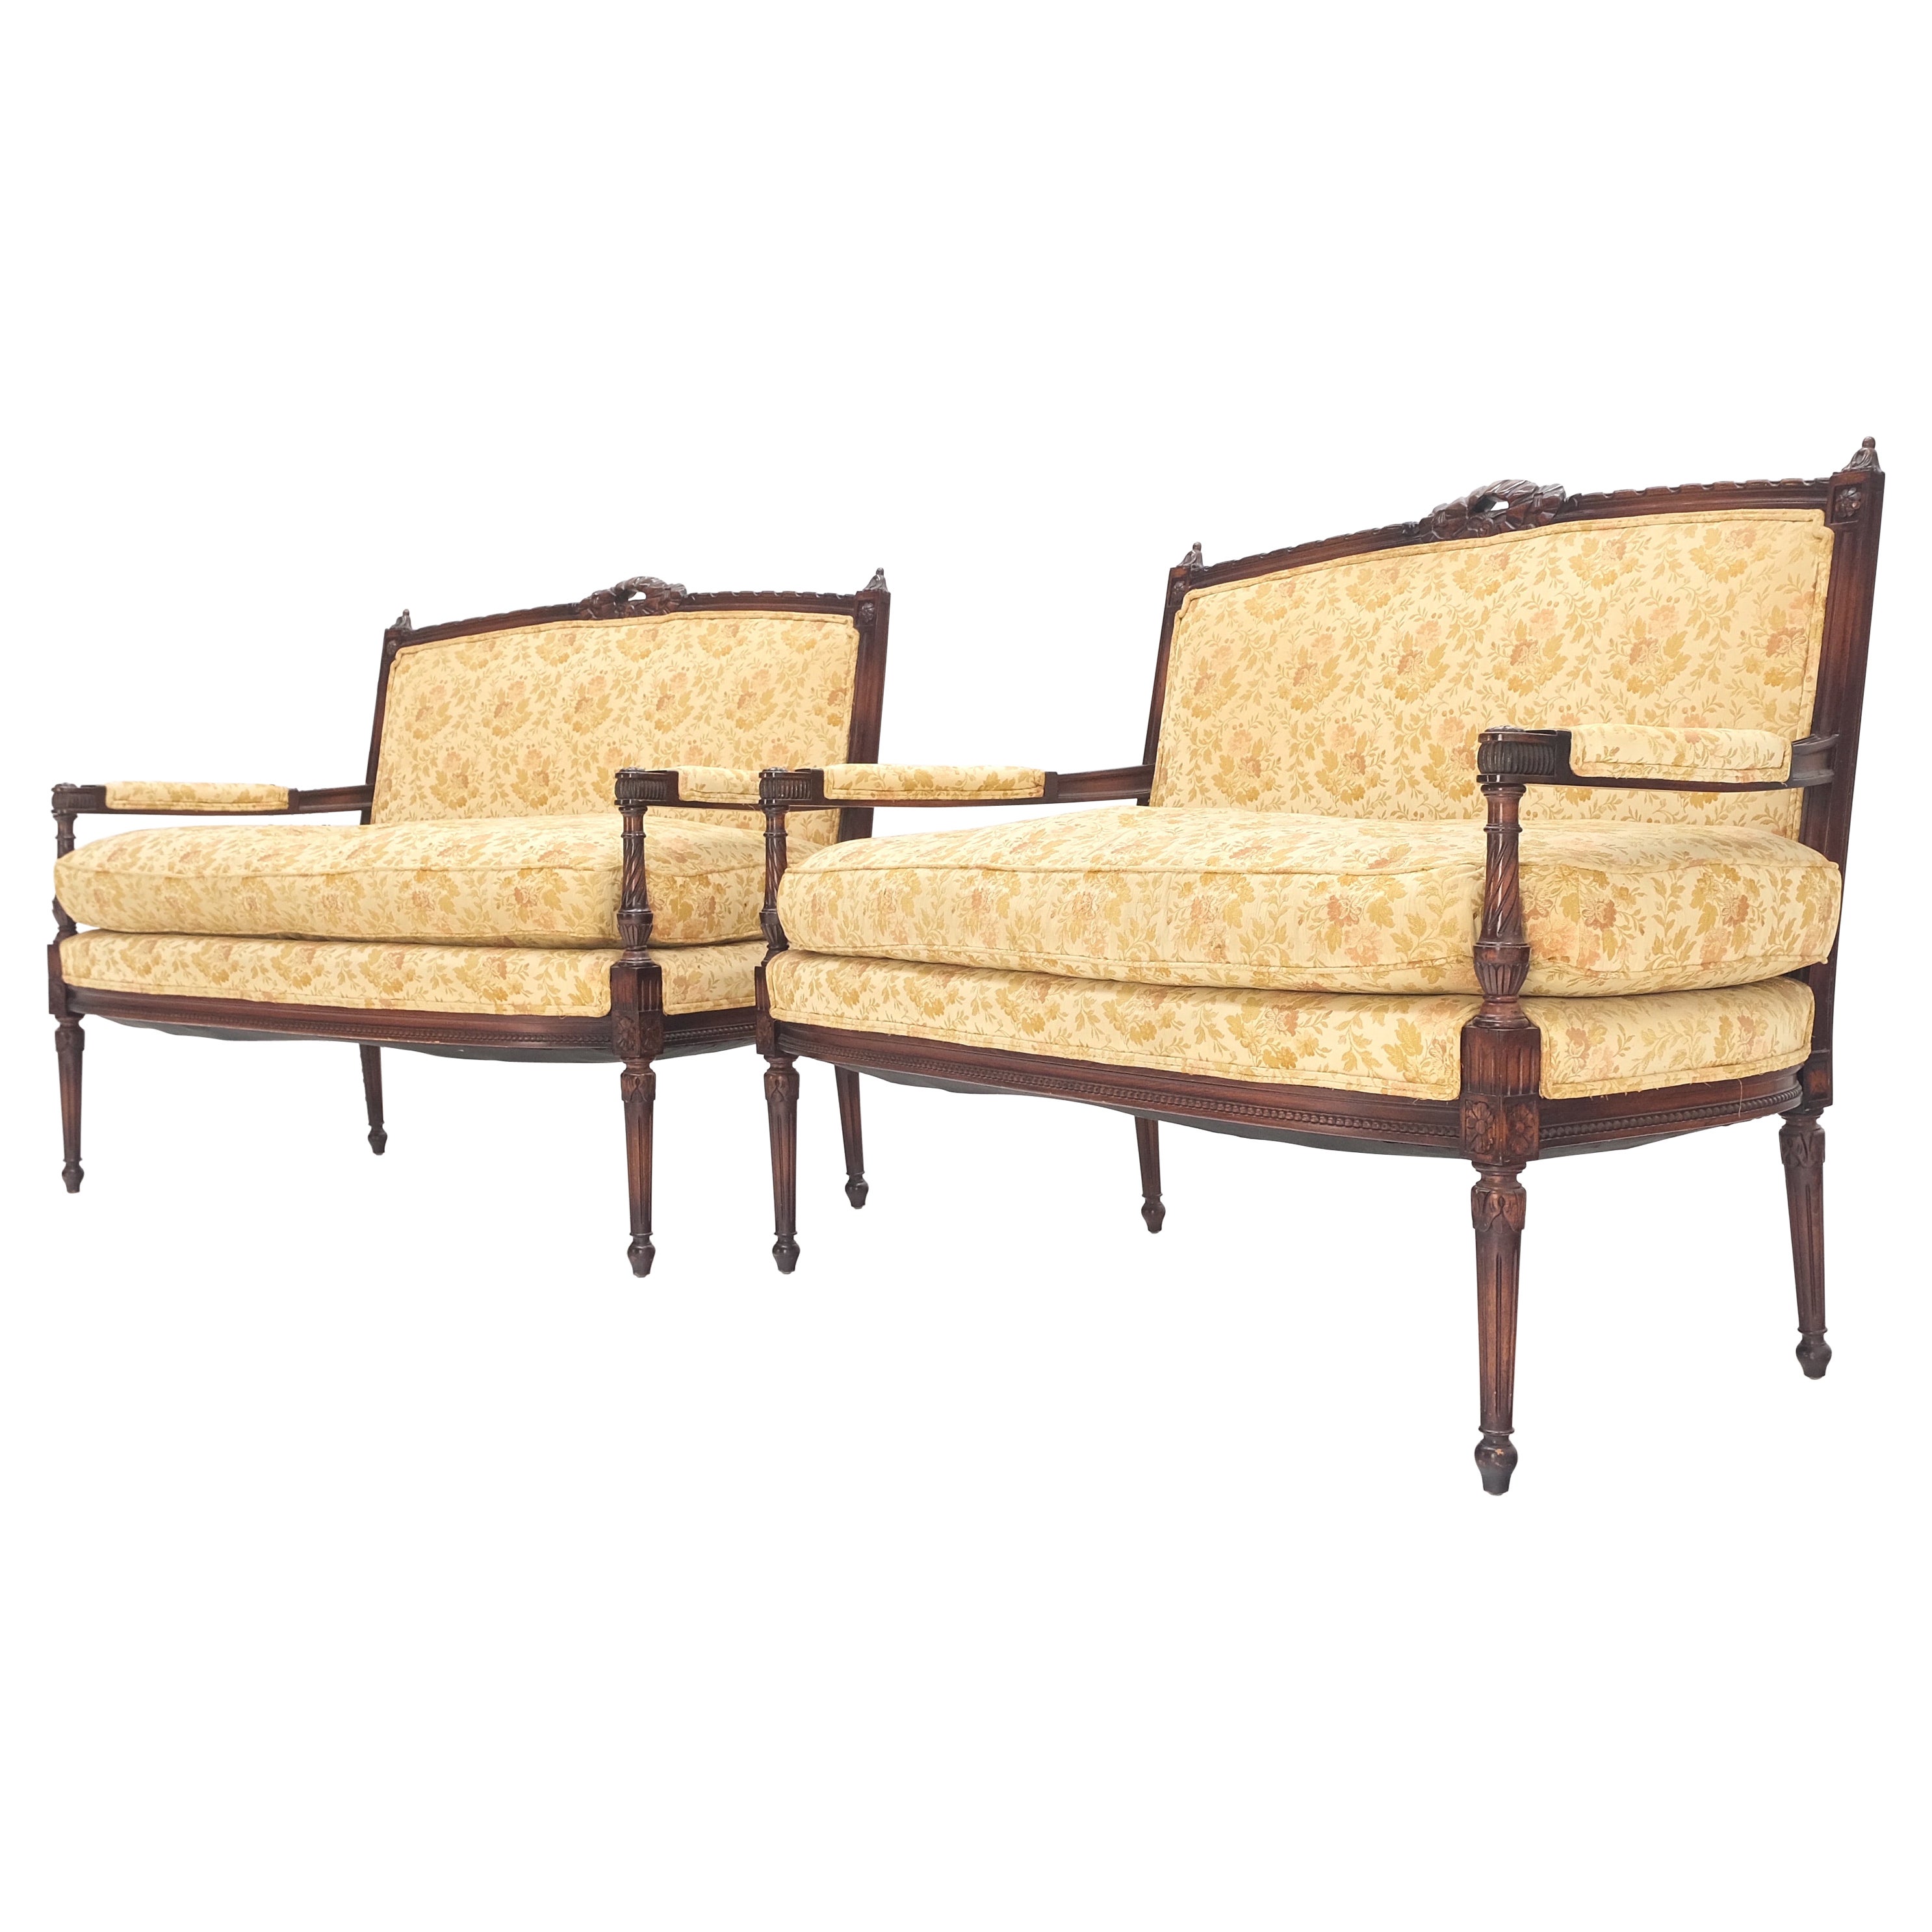 Pair of Antique Quality Carved Walnut & Gold Upholstery Sofas Love Seats MINT! For Sale